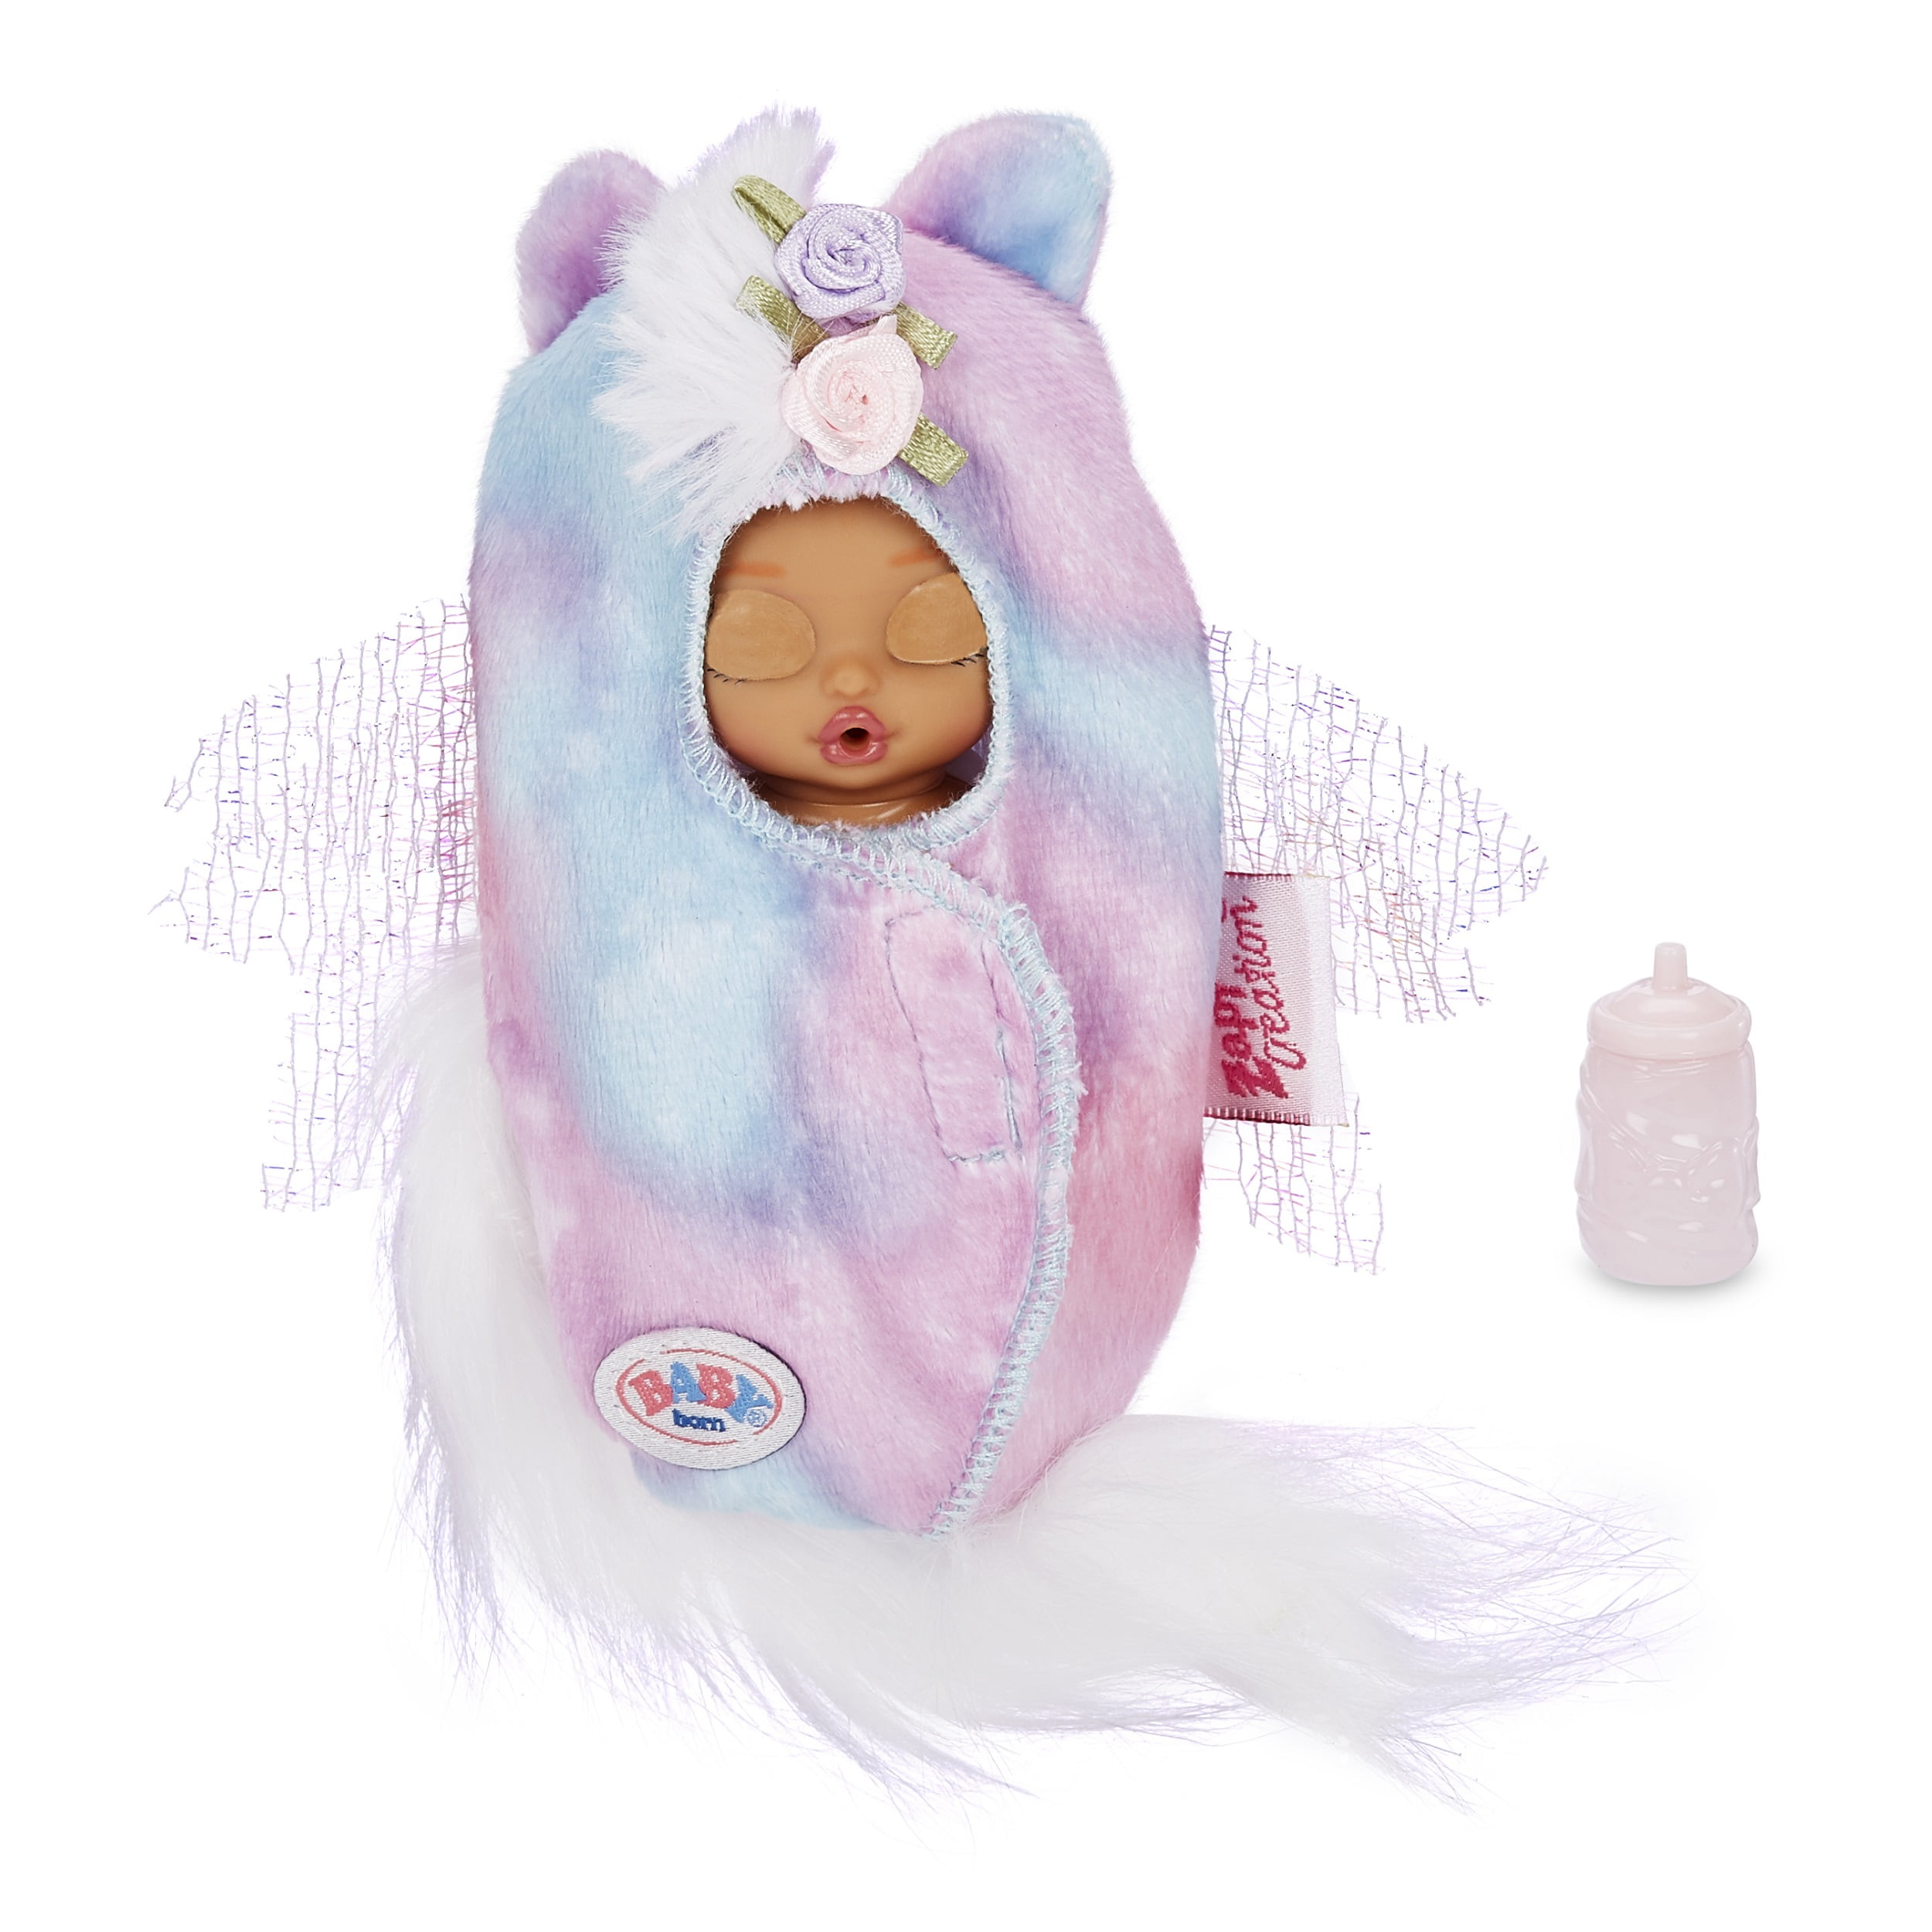  Baby Born Surprise Collectible Baby Dolls with Color Change  Diaper, Multicolor : Toys & Games